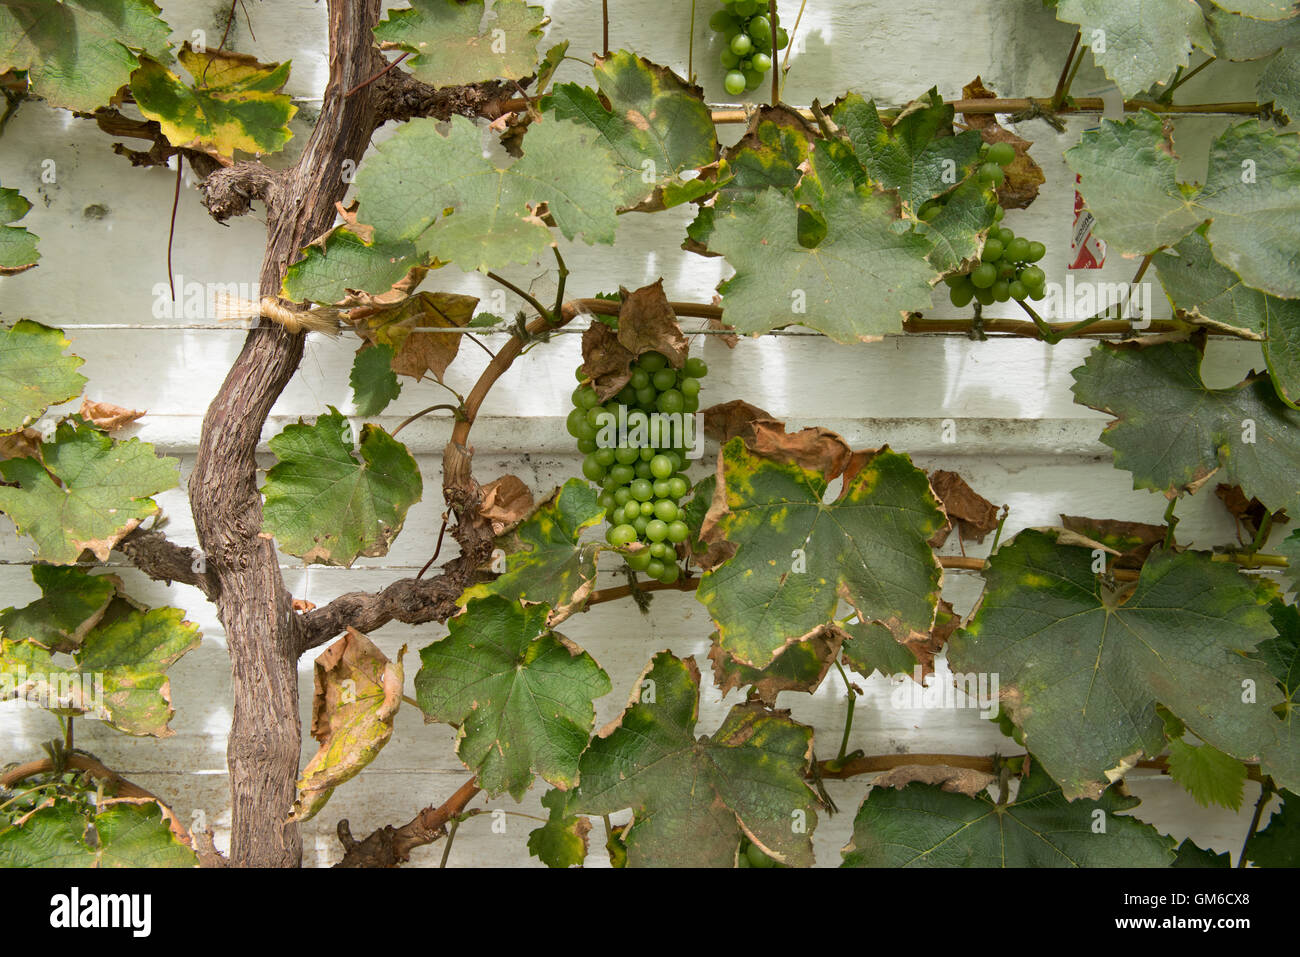 Bunches of Grapes (Vitis vinifera) Growing on a Vine against a White Painted Wall in a Greenhouse in Somerset, England, UK Stock Photo